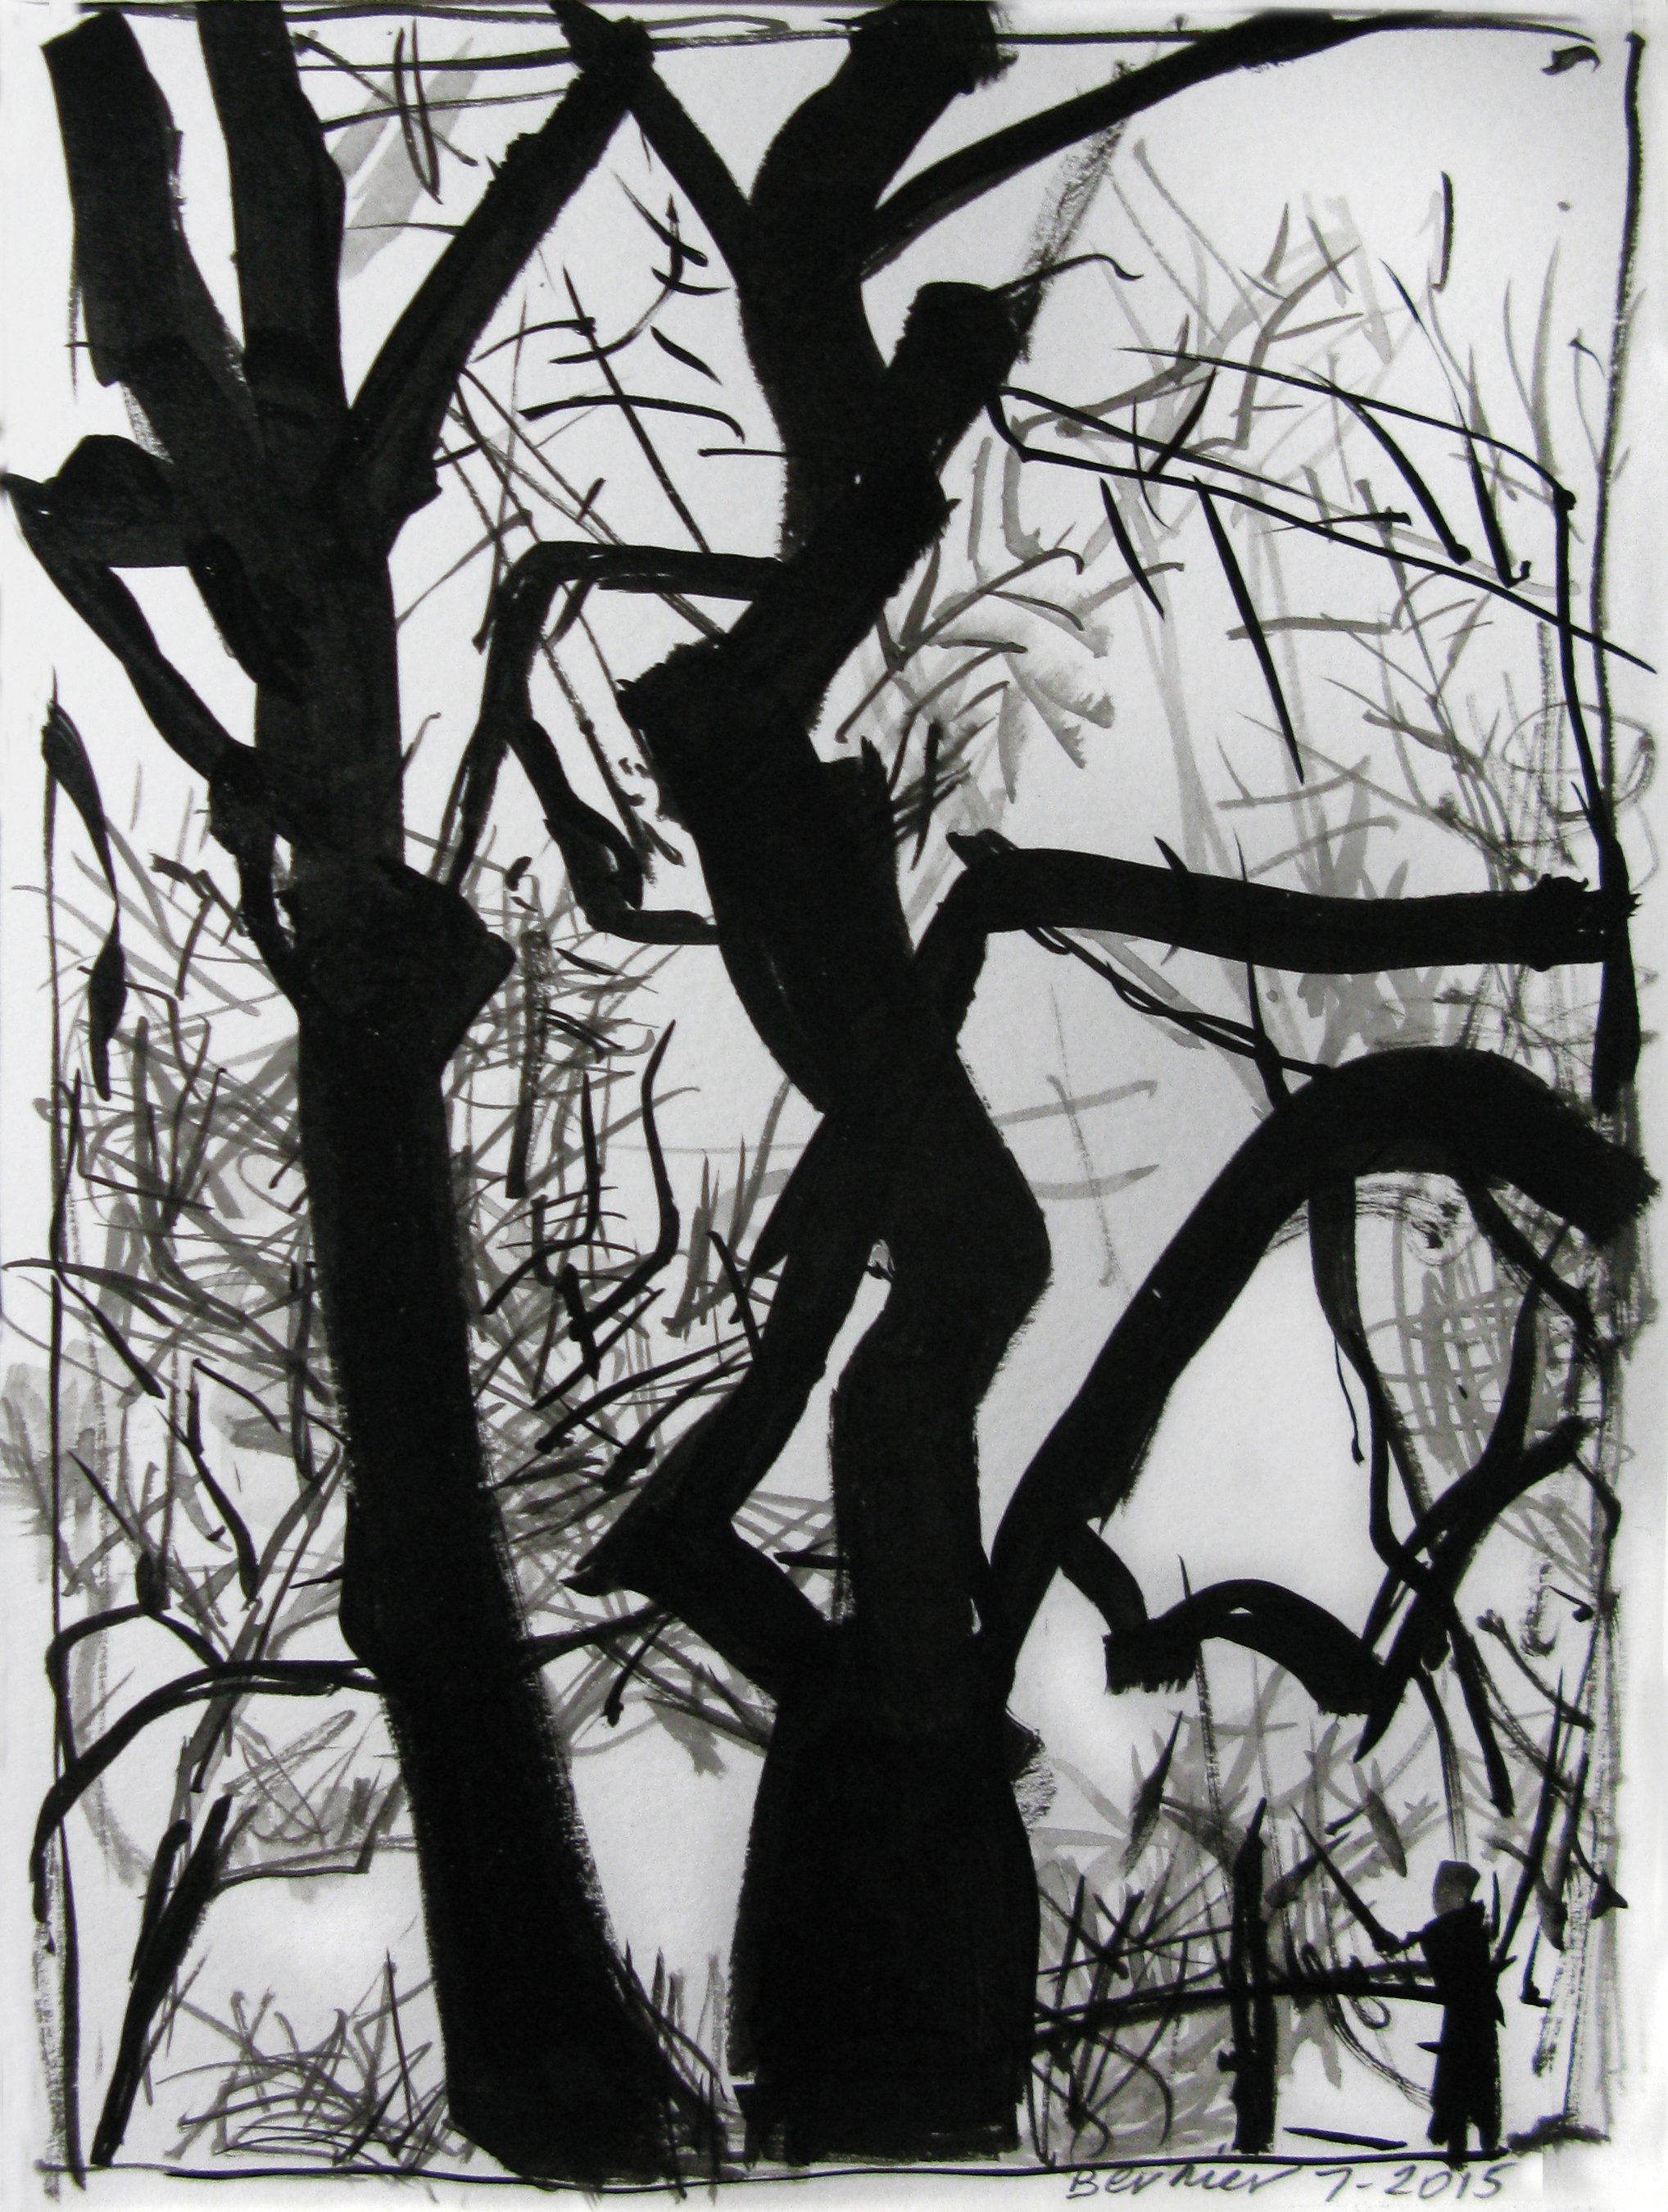    Central Park Trees,   ink, 11 3/4 x 9 1/2 in, 2015 